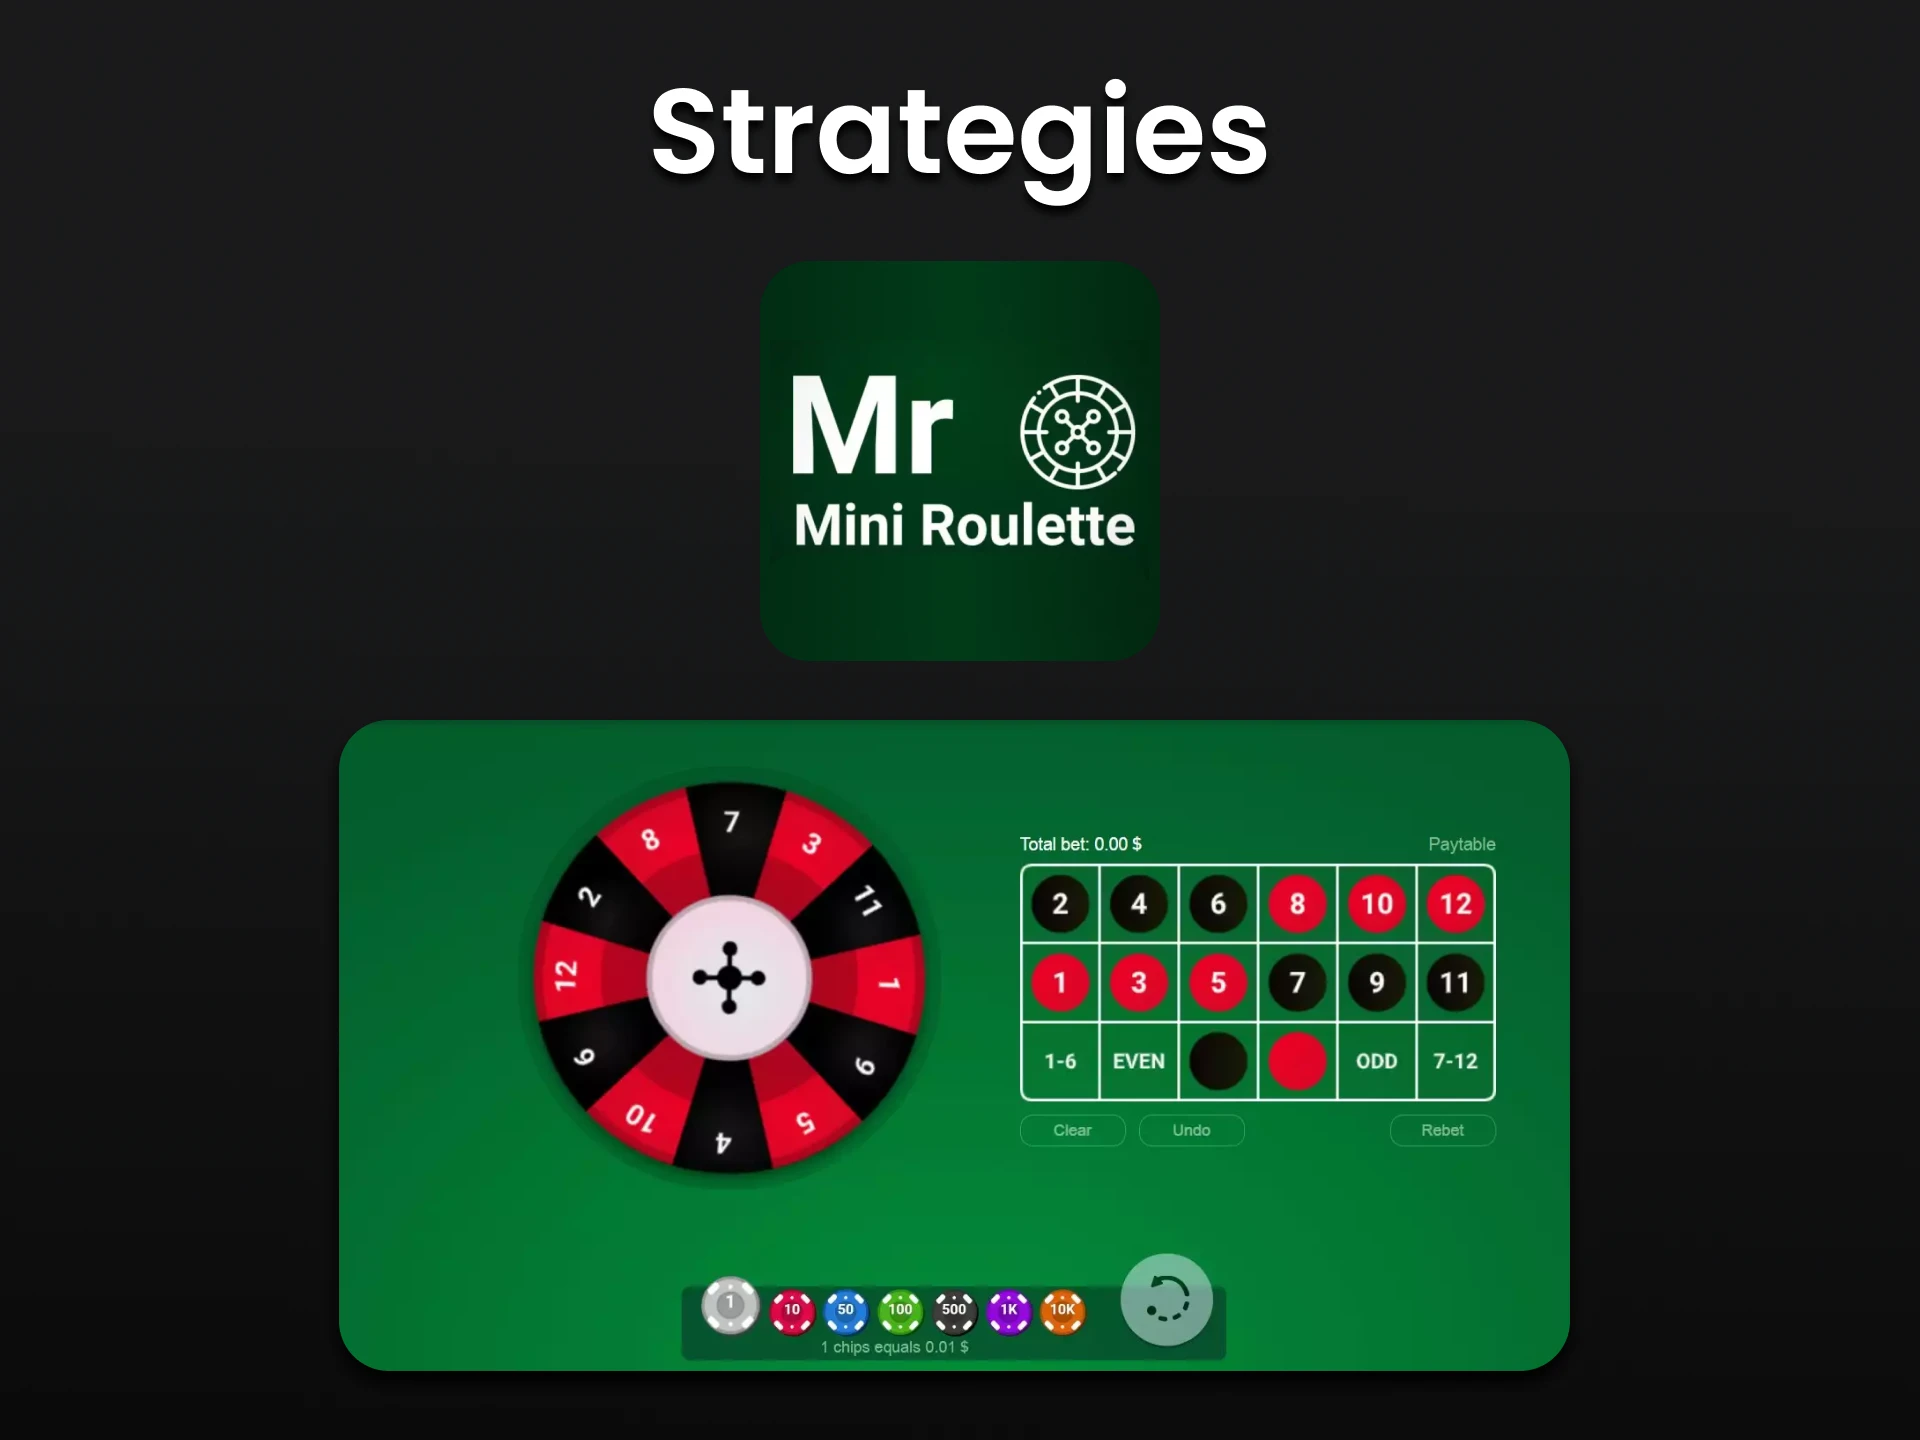 Learn strategies to win at Mini Roulette.